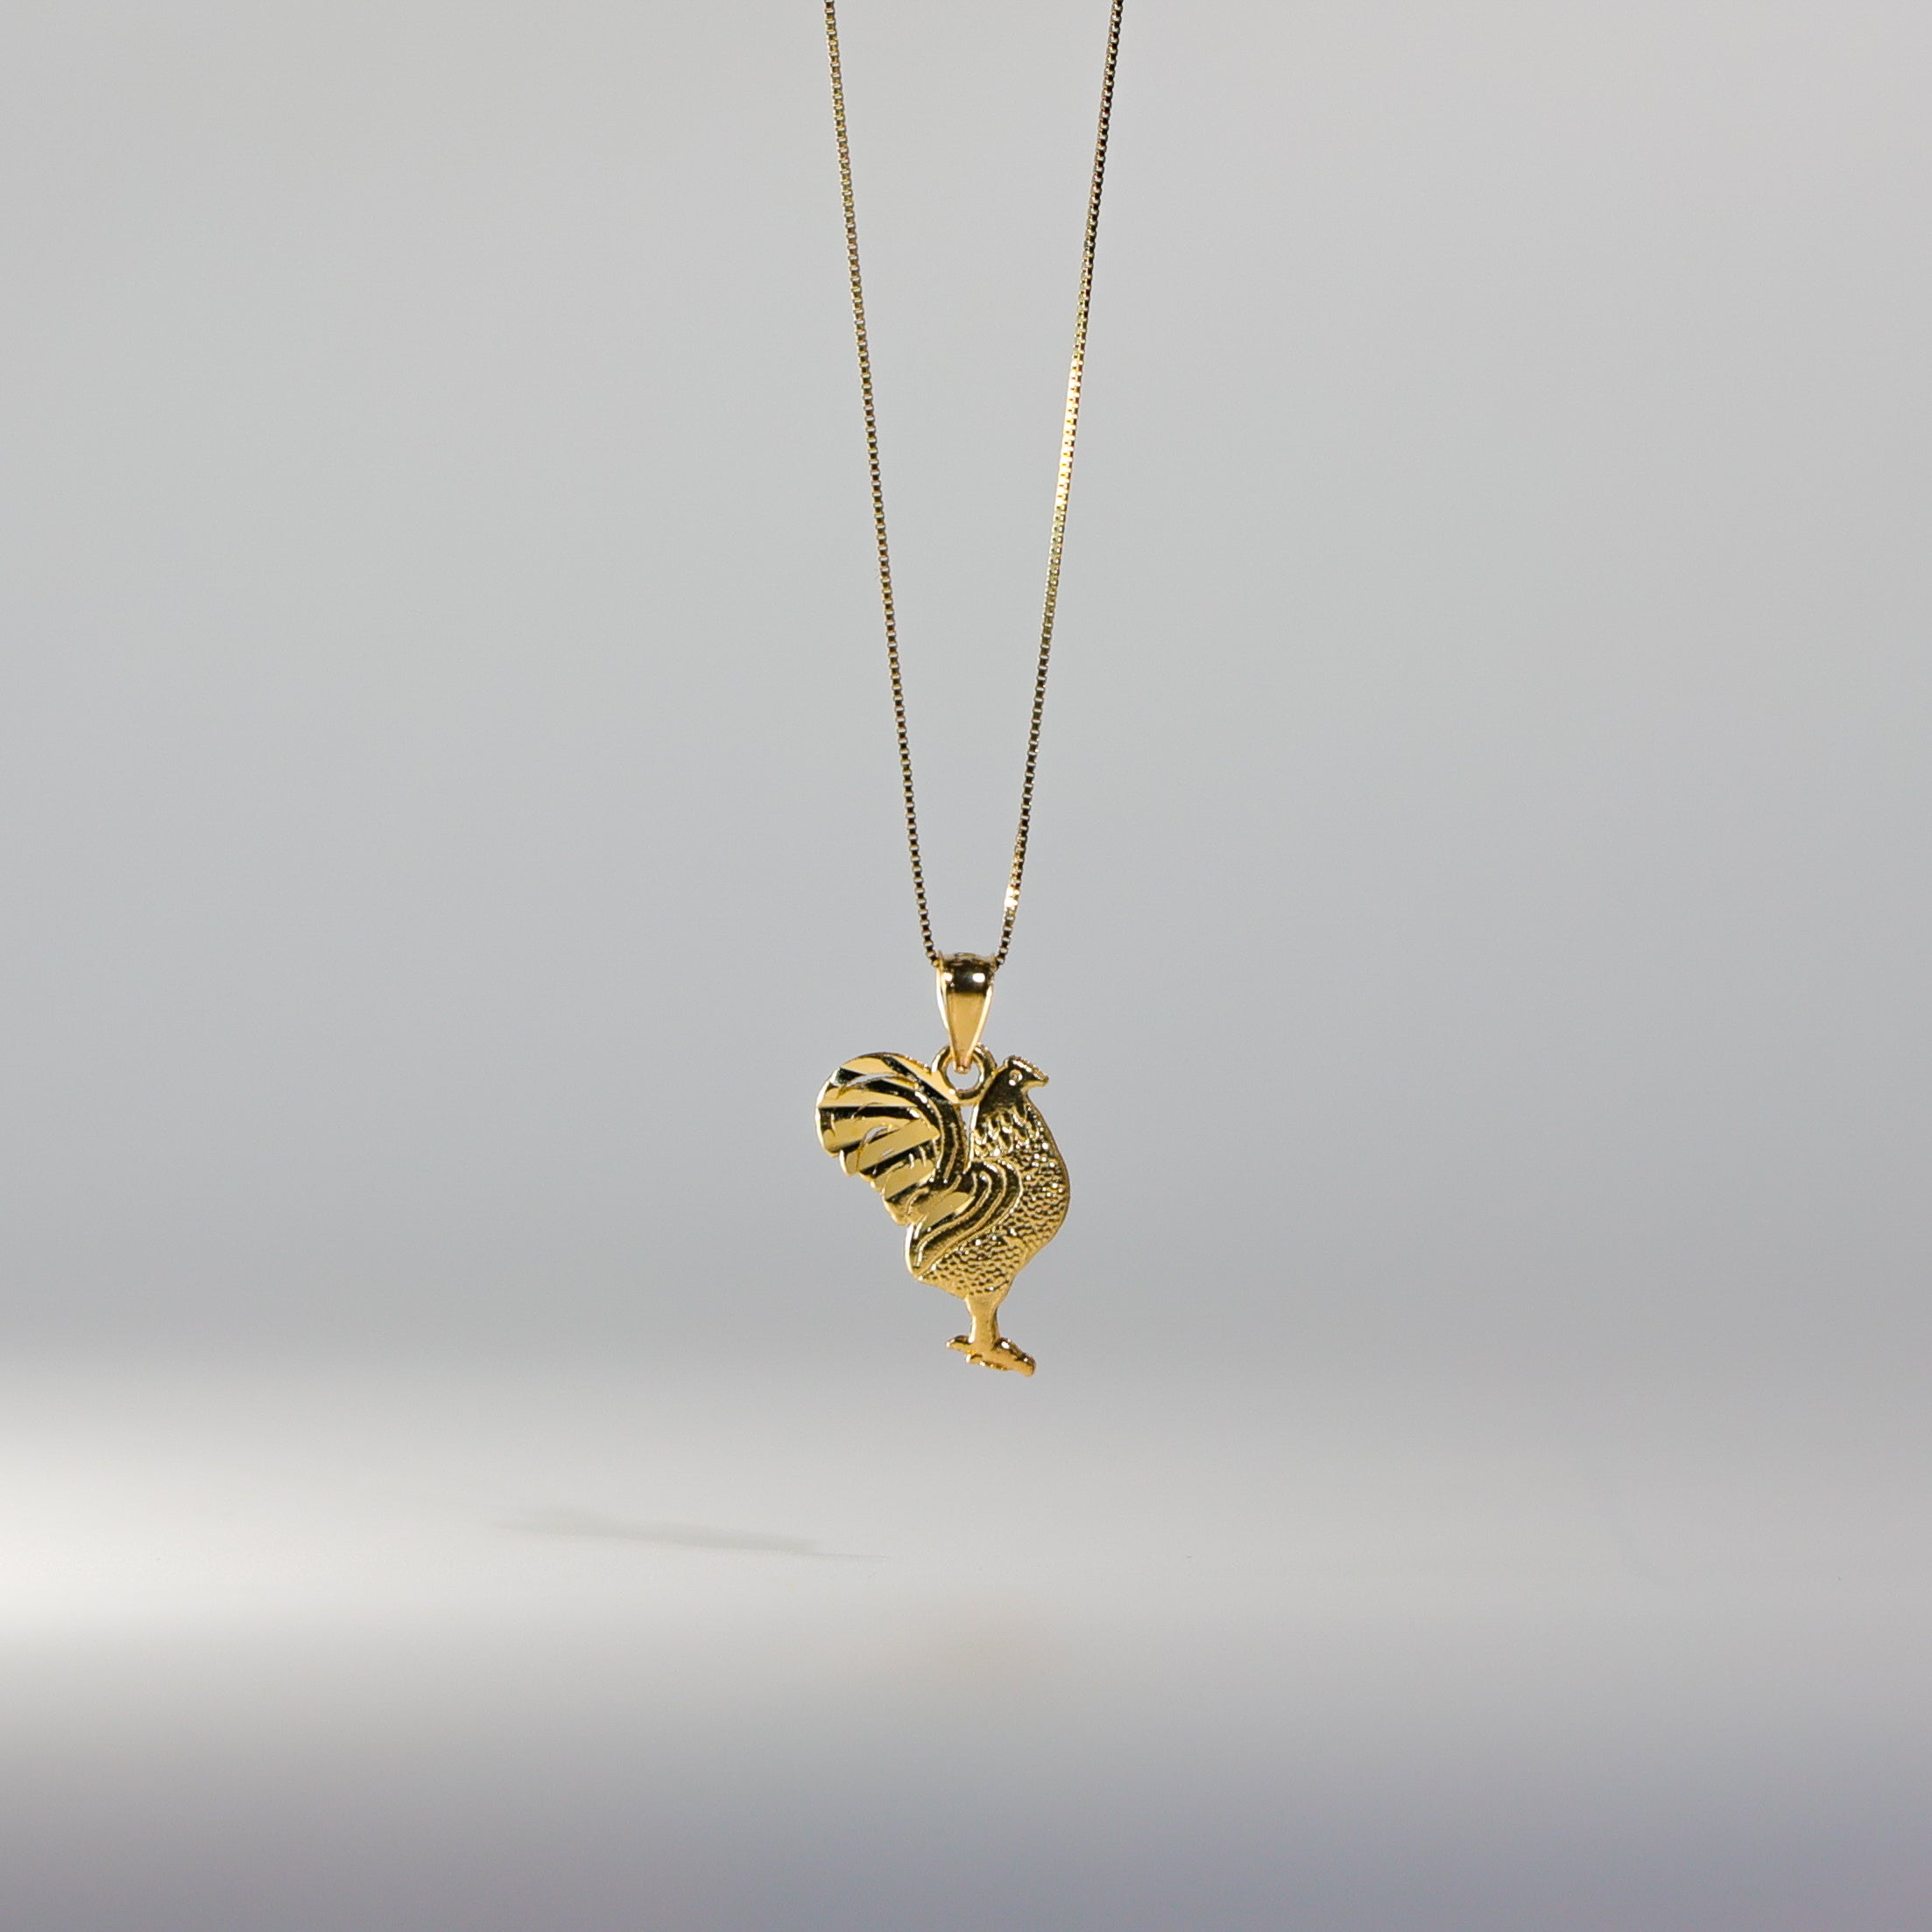 Gold Rooster Pendant Model-1613 - Charlie & Co. Jewelry